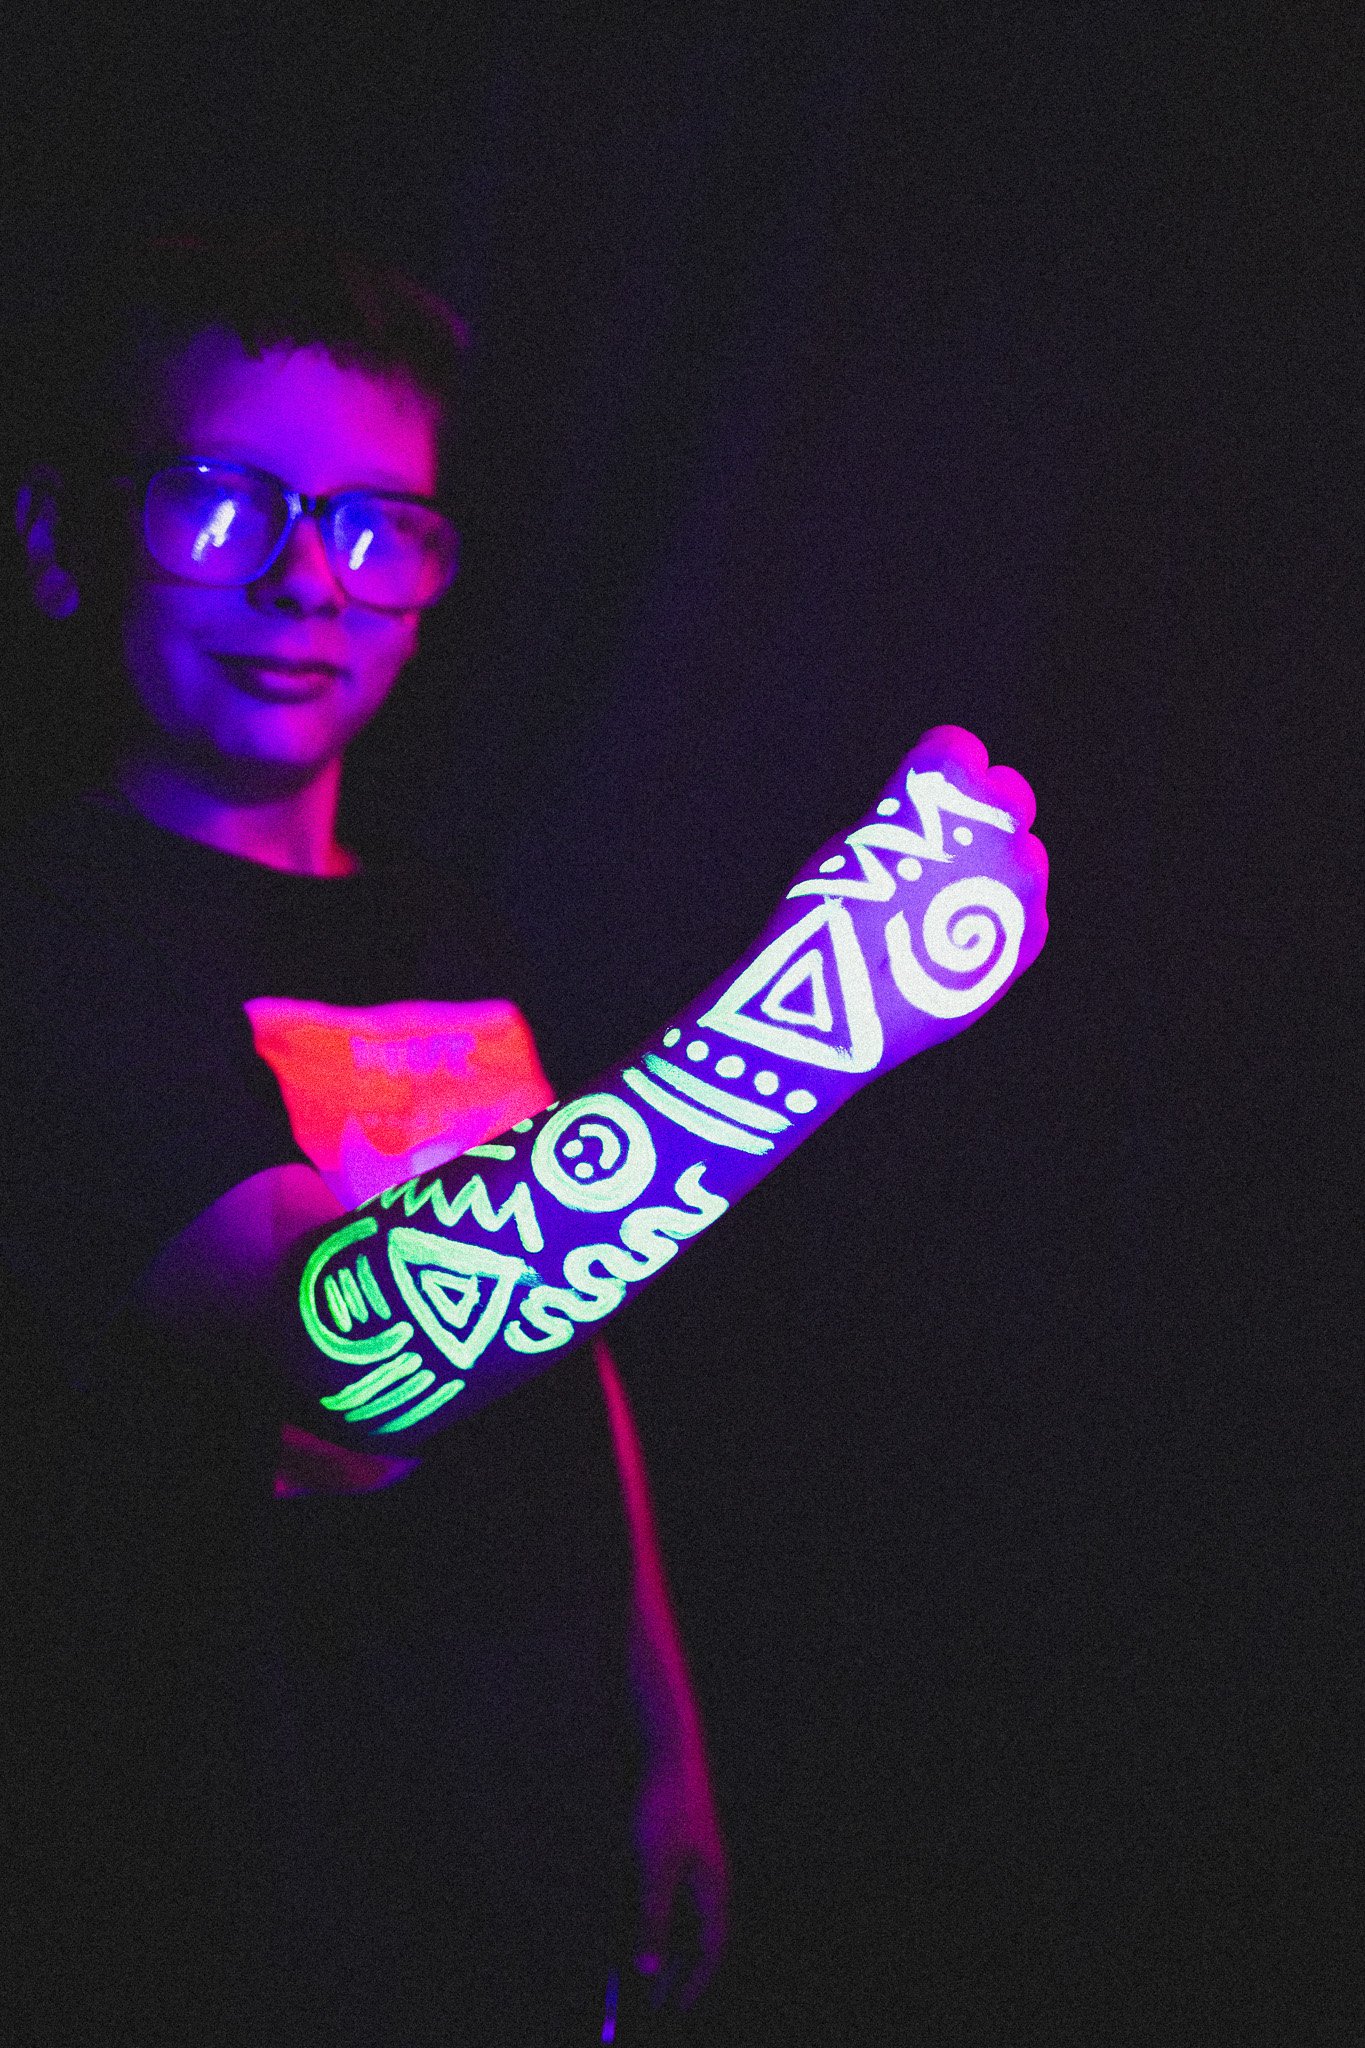 Kid poses with geometric neon body paint on their arm for alternative neon body painting creative photoshoot by phoenix body artist, La Luna Henna and photographer Jennifer Lind Schutsky.